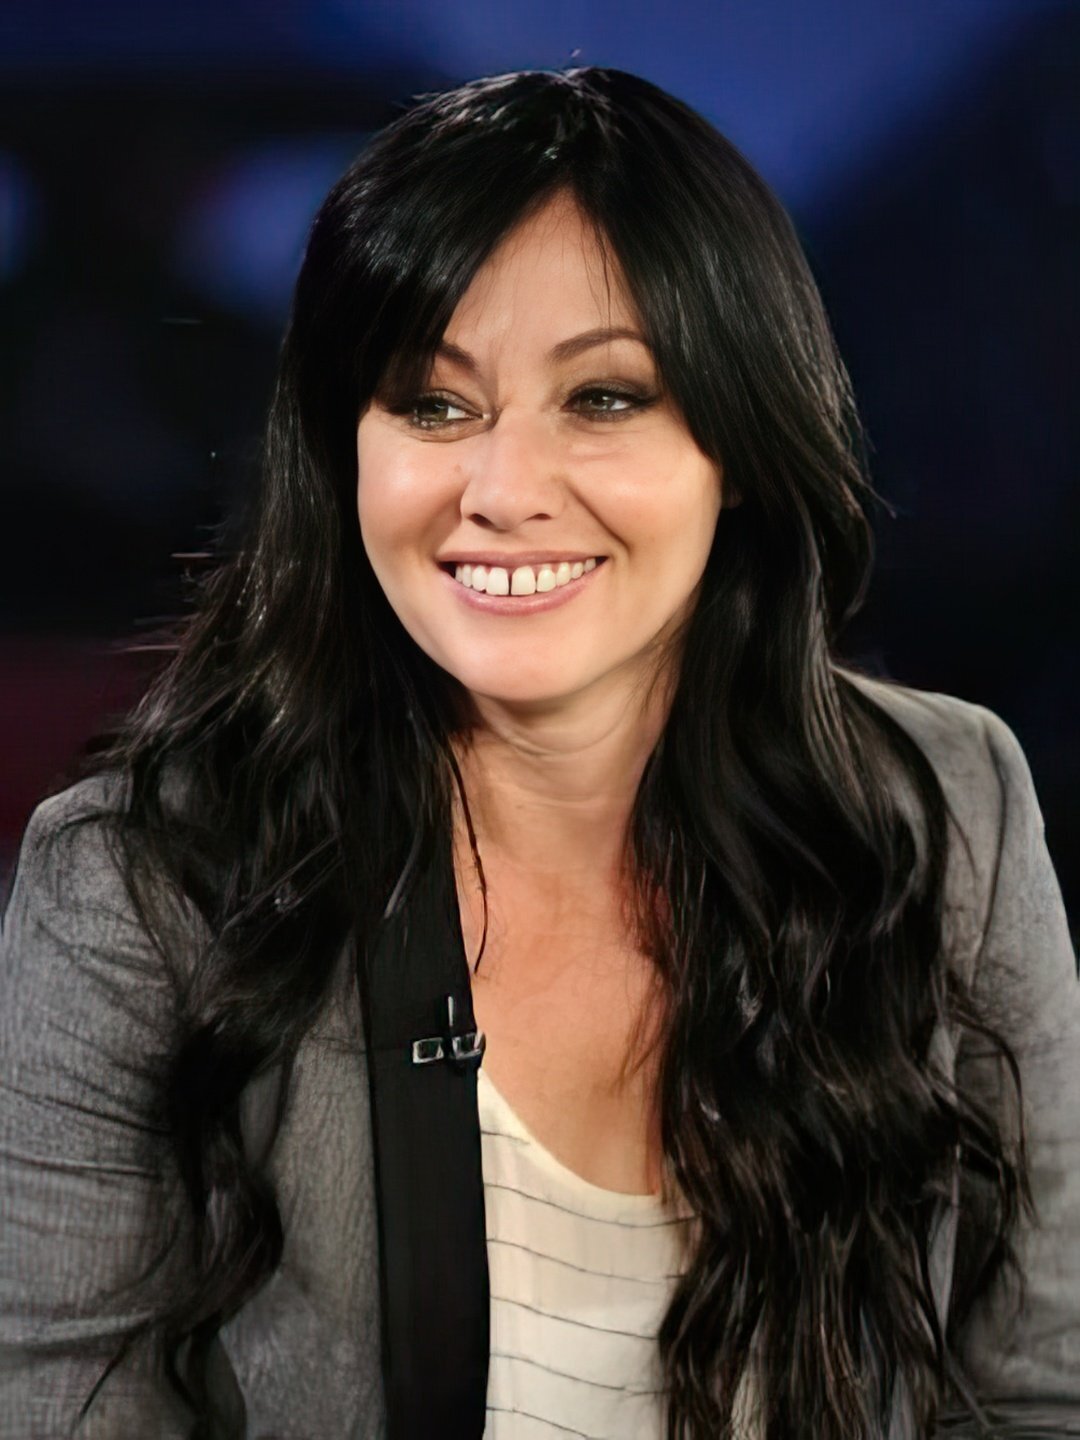 Shannen Doherty how did she became famous